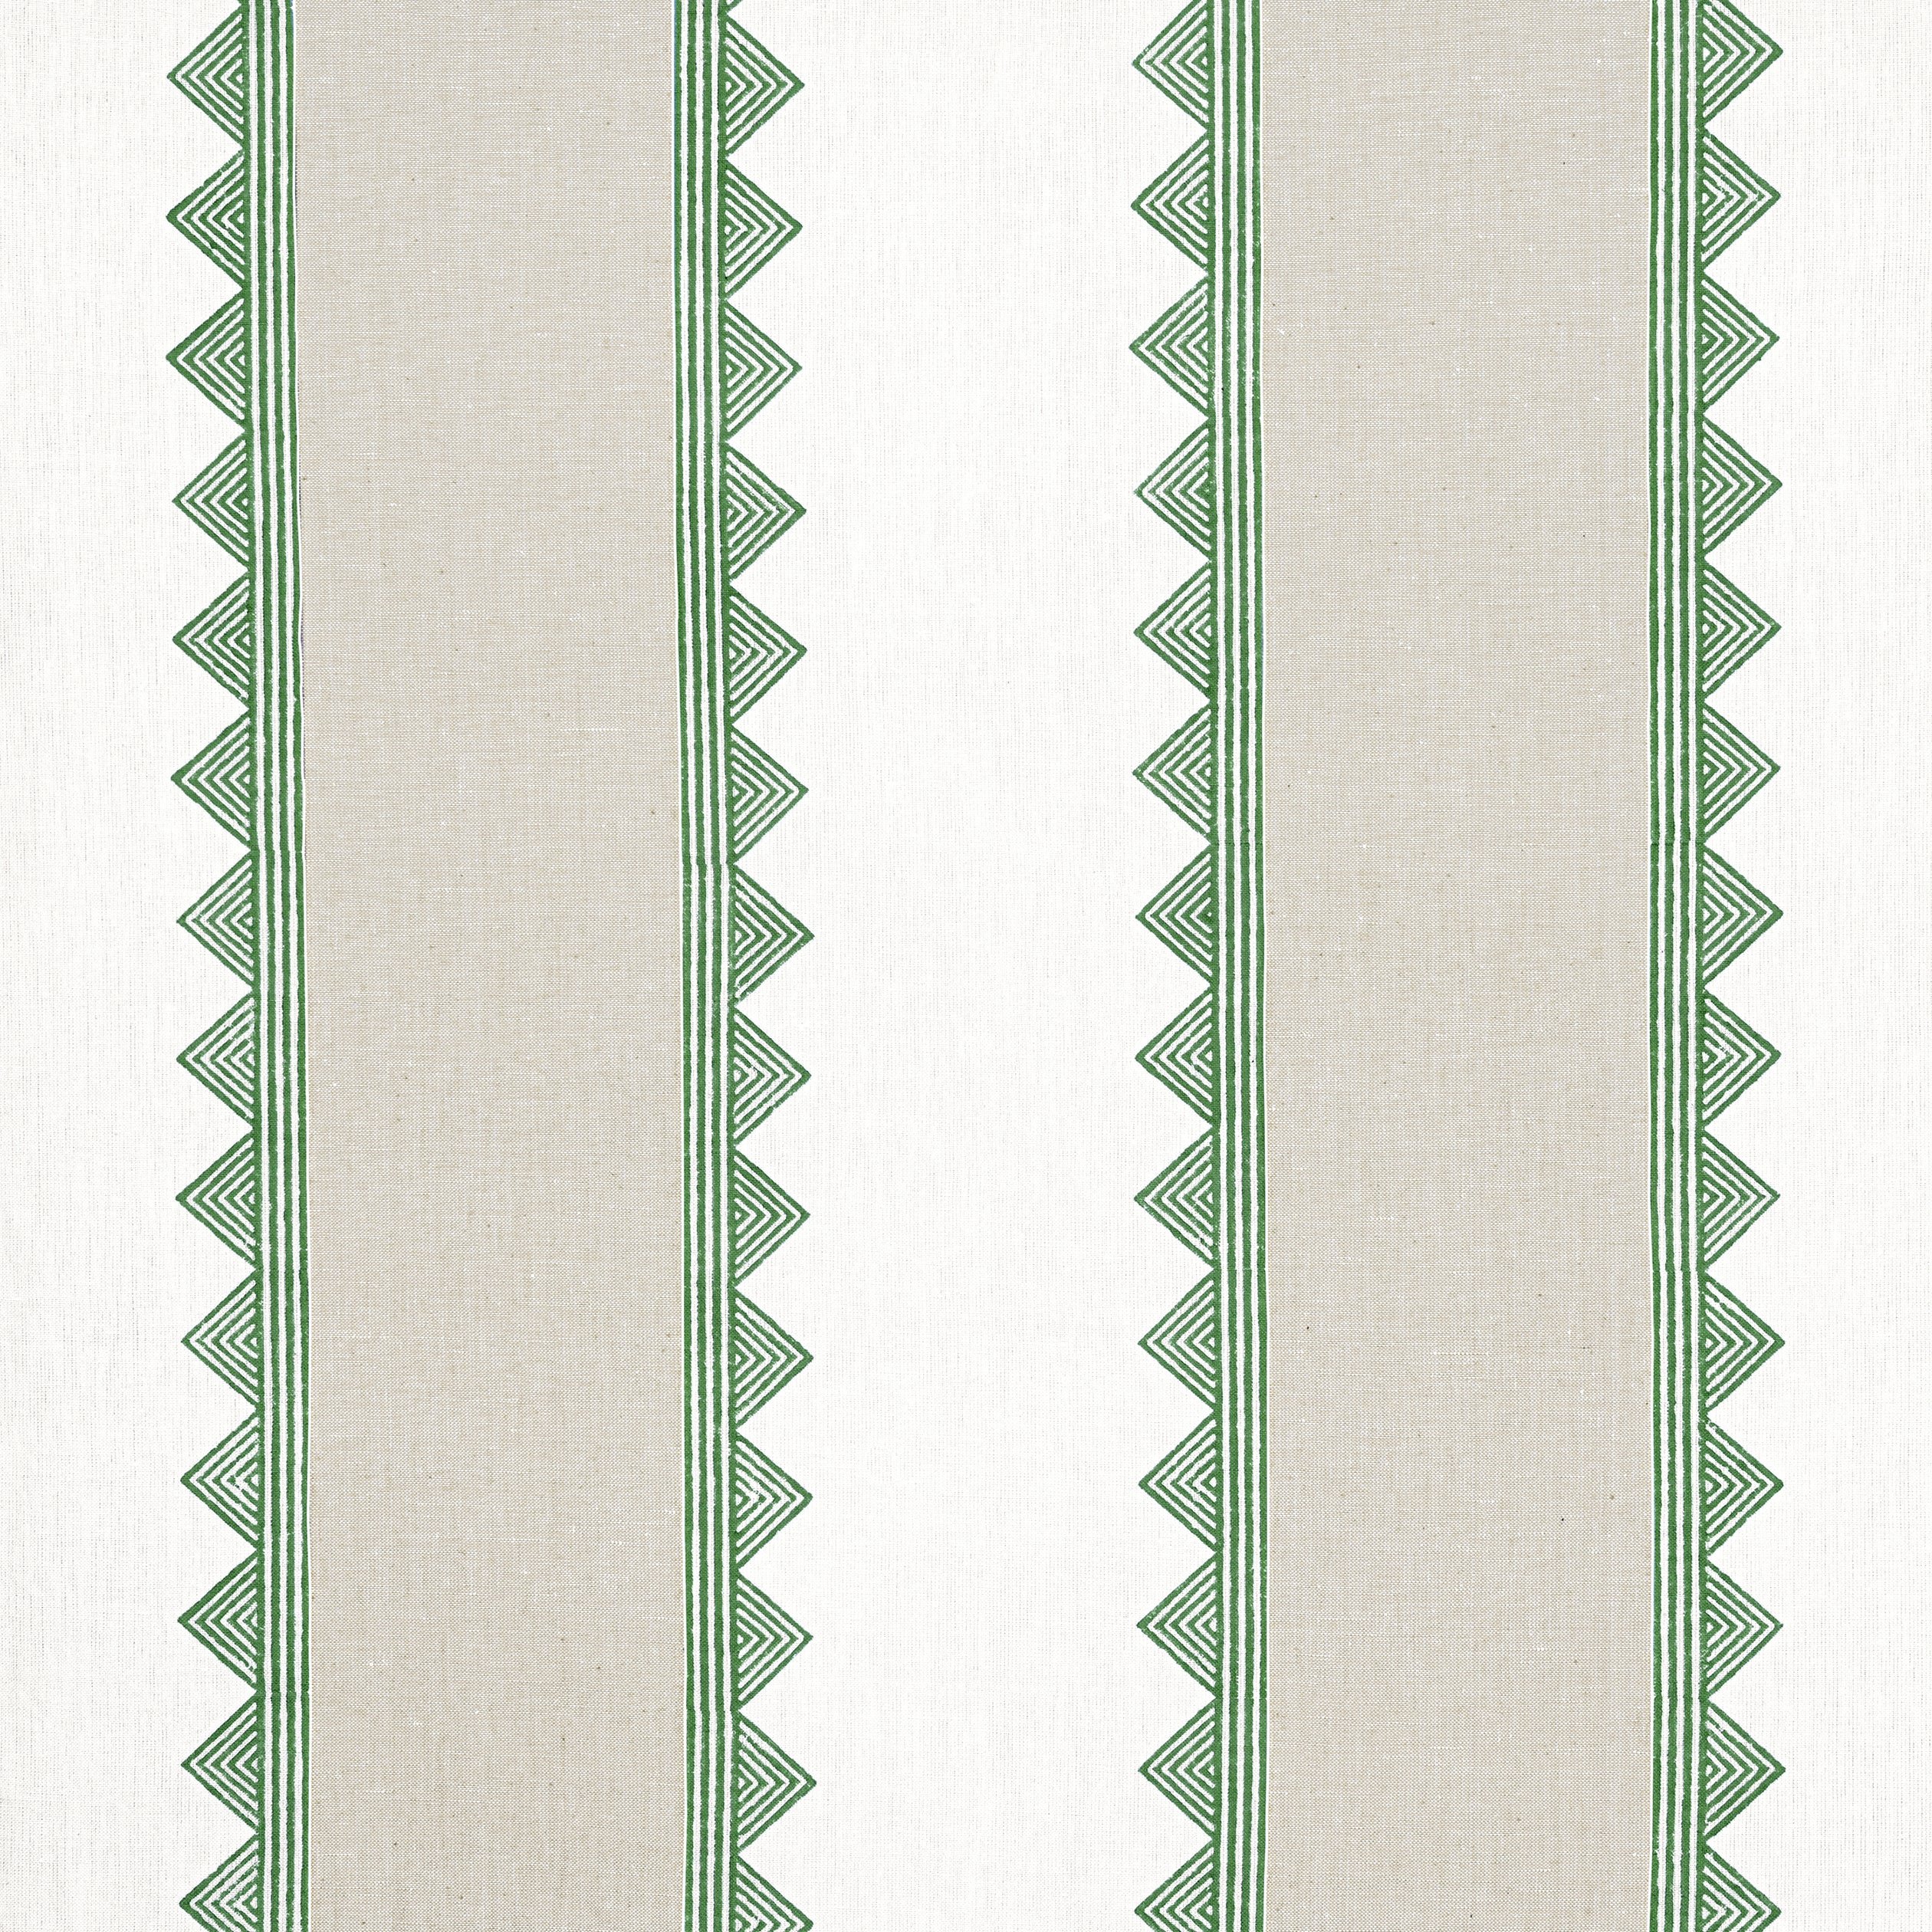 Kismet Stripe fabric in green color - pattern number F916227 - by Thibaut in the Kismet collection